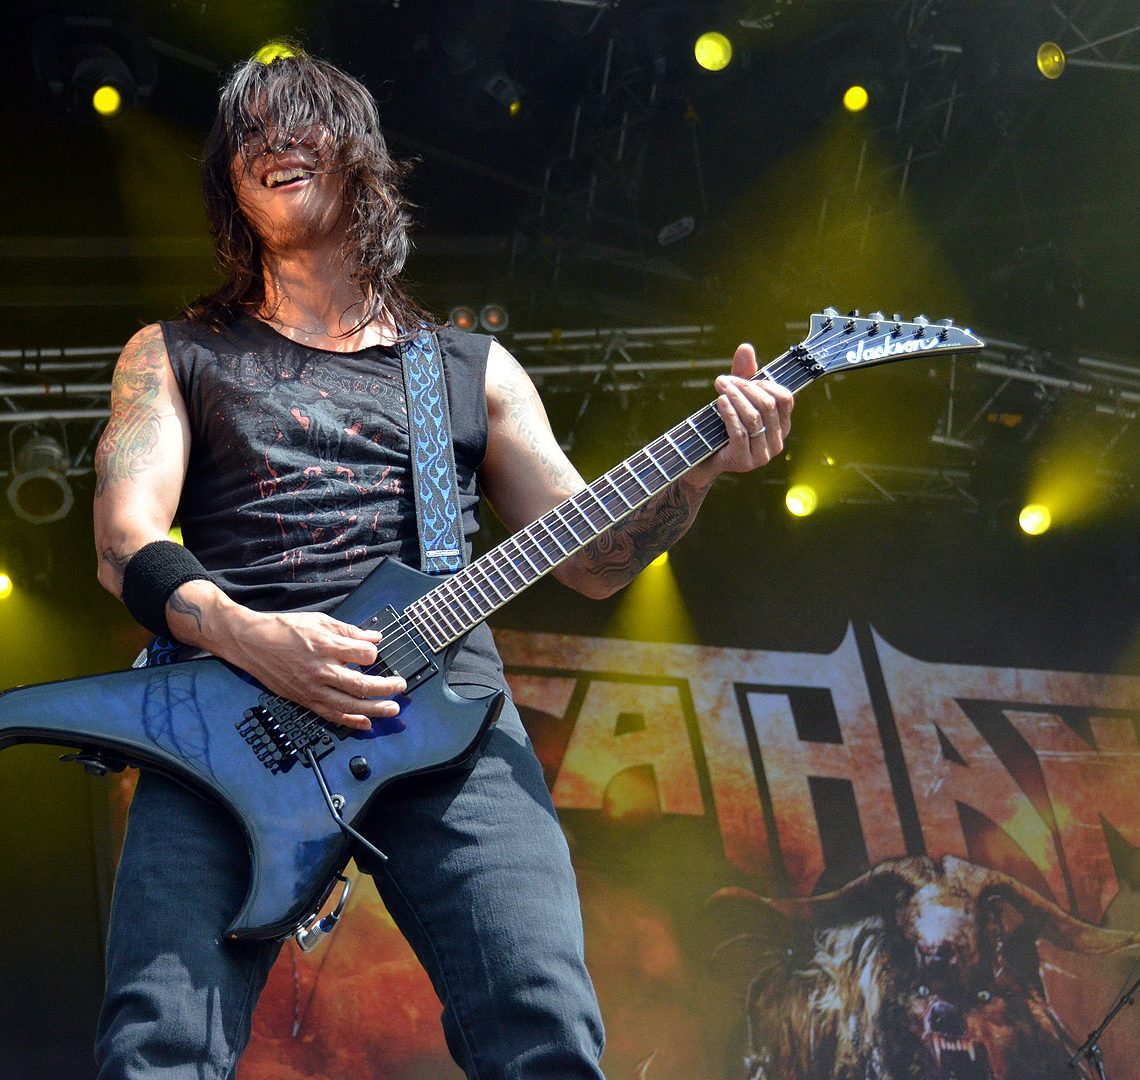 Interview with Rob Cavestany from Death Angel